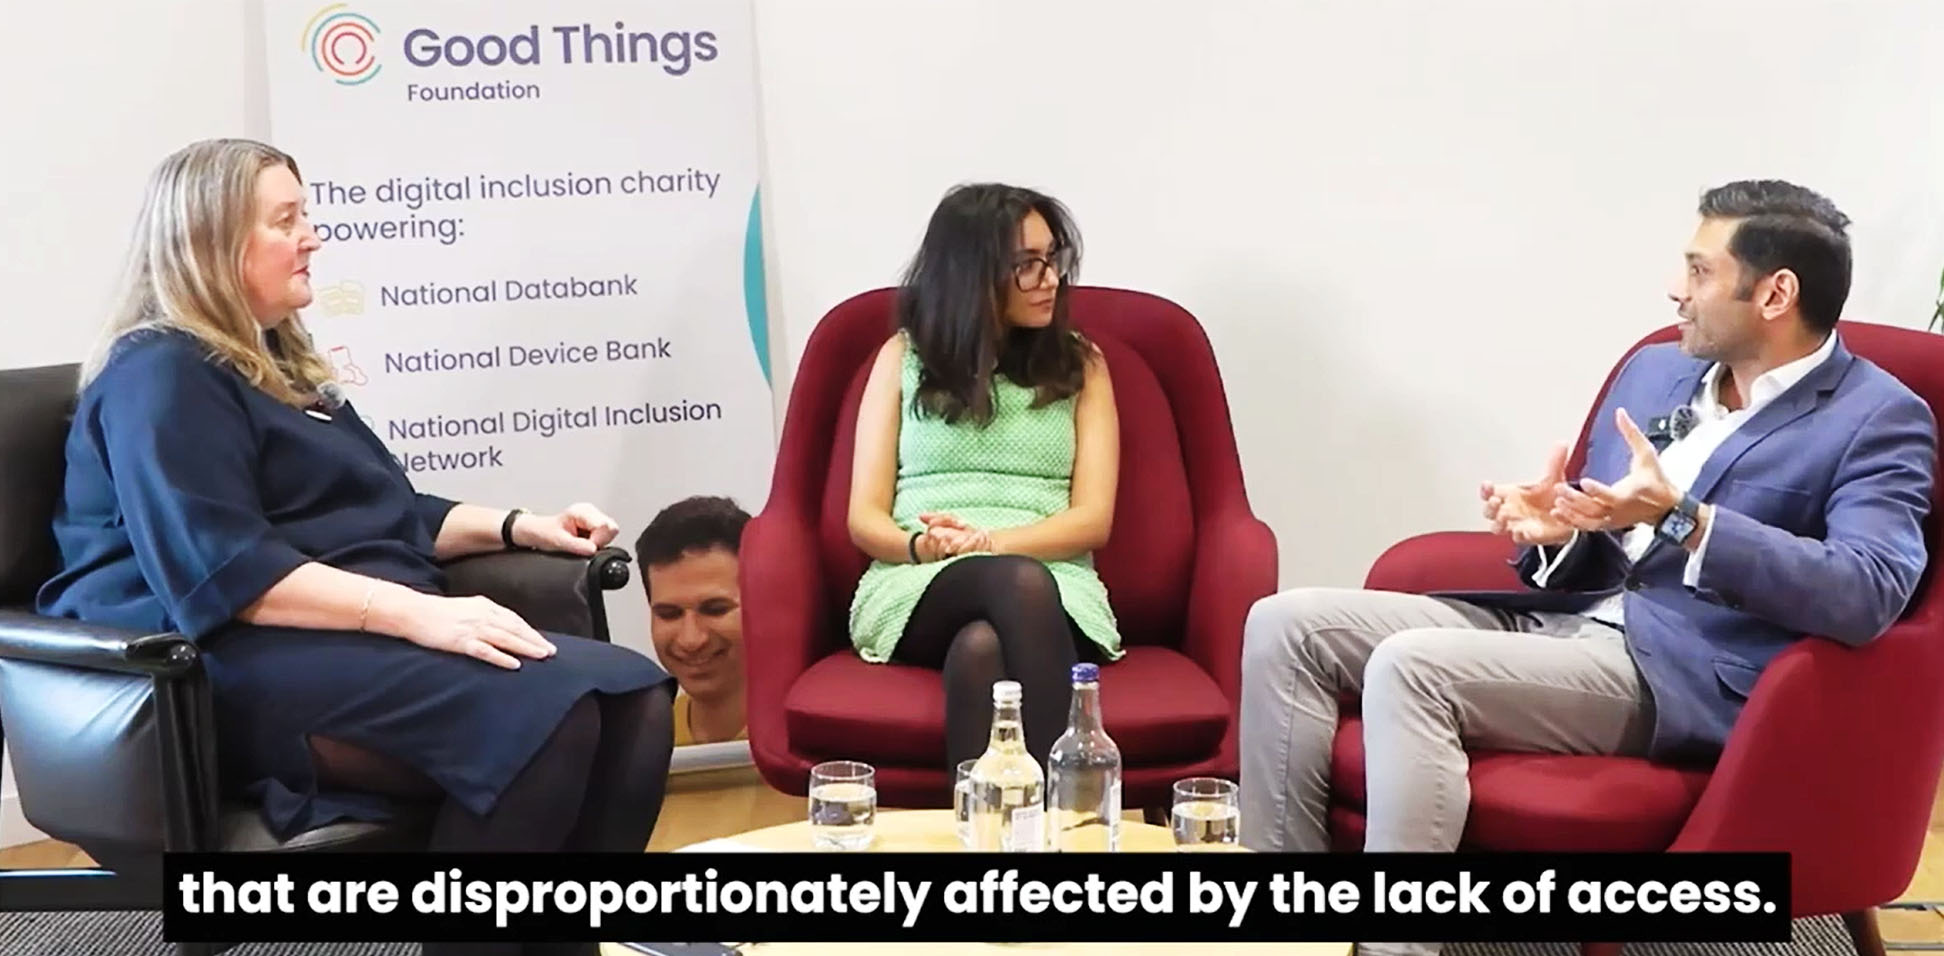 Digital Futures for Good: exploring a nation without digital exclusion. This image is a still shot of a webinar, where the panellists are discussing digital exclusion in healthcare.